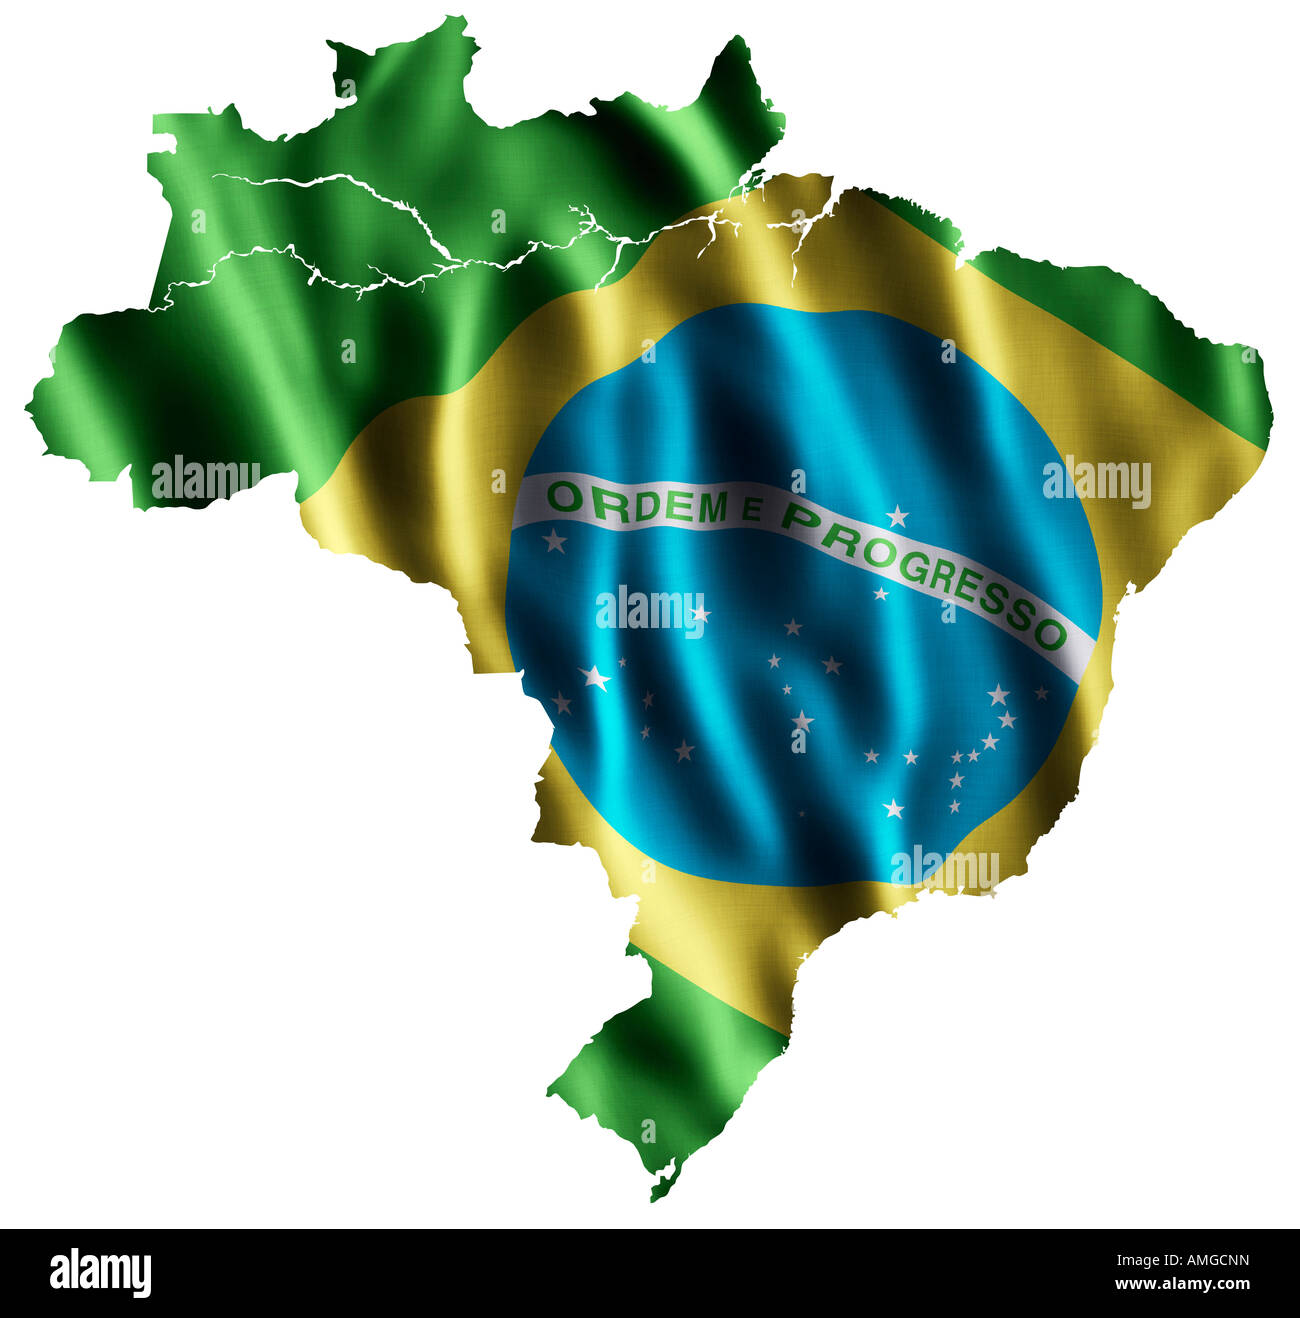 National flag of Brazil as a map Stock Photo